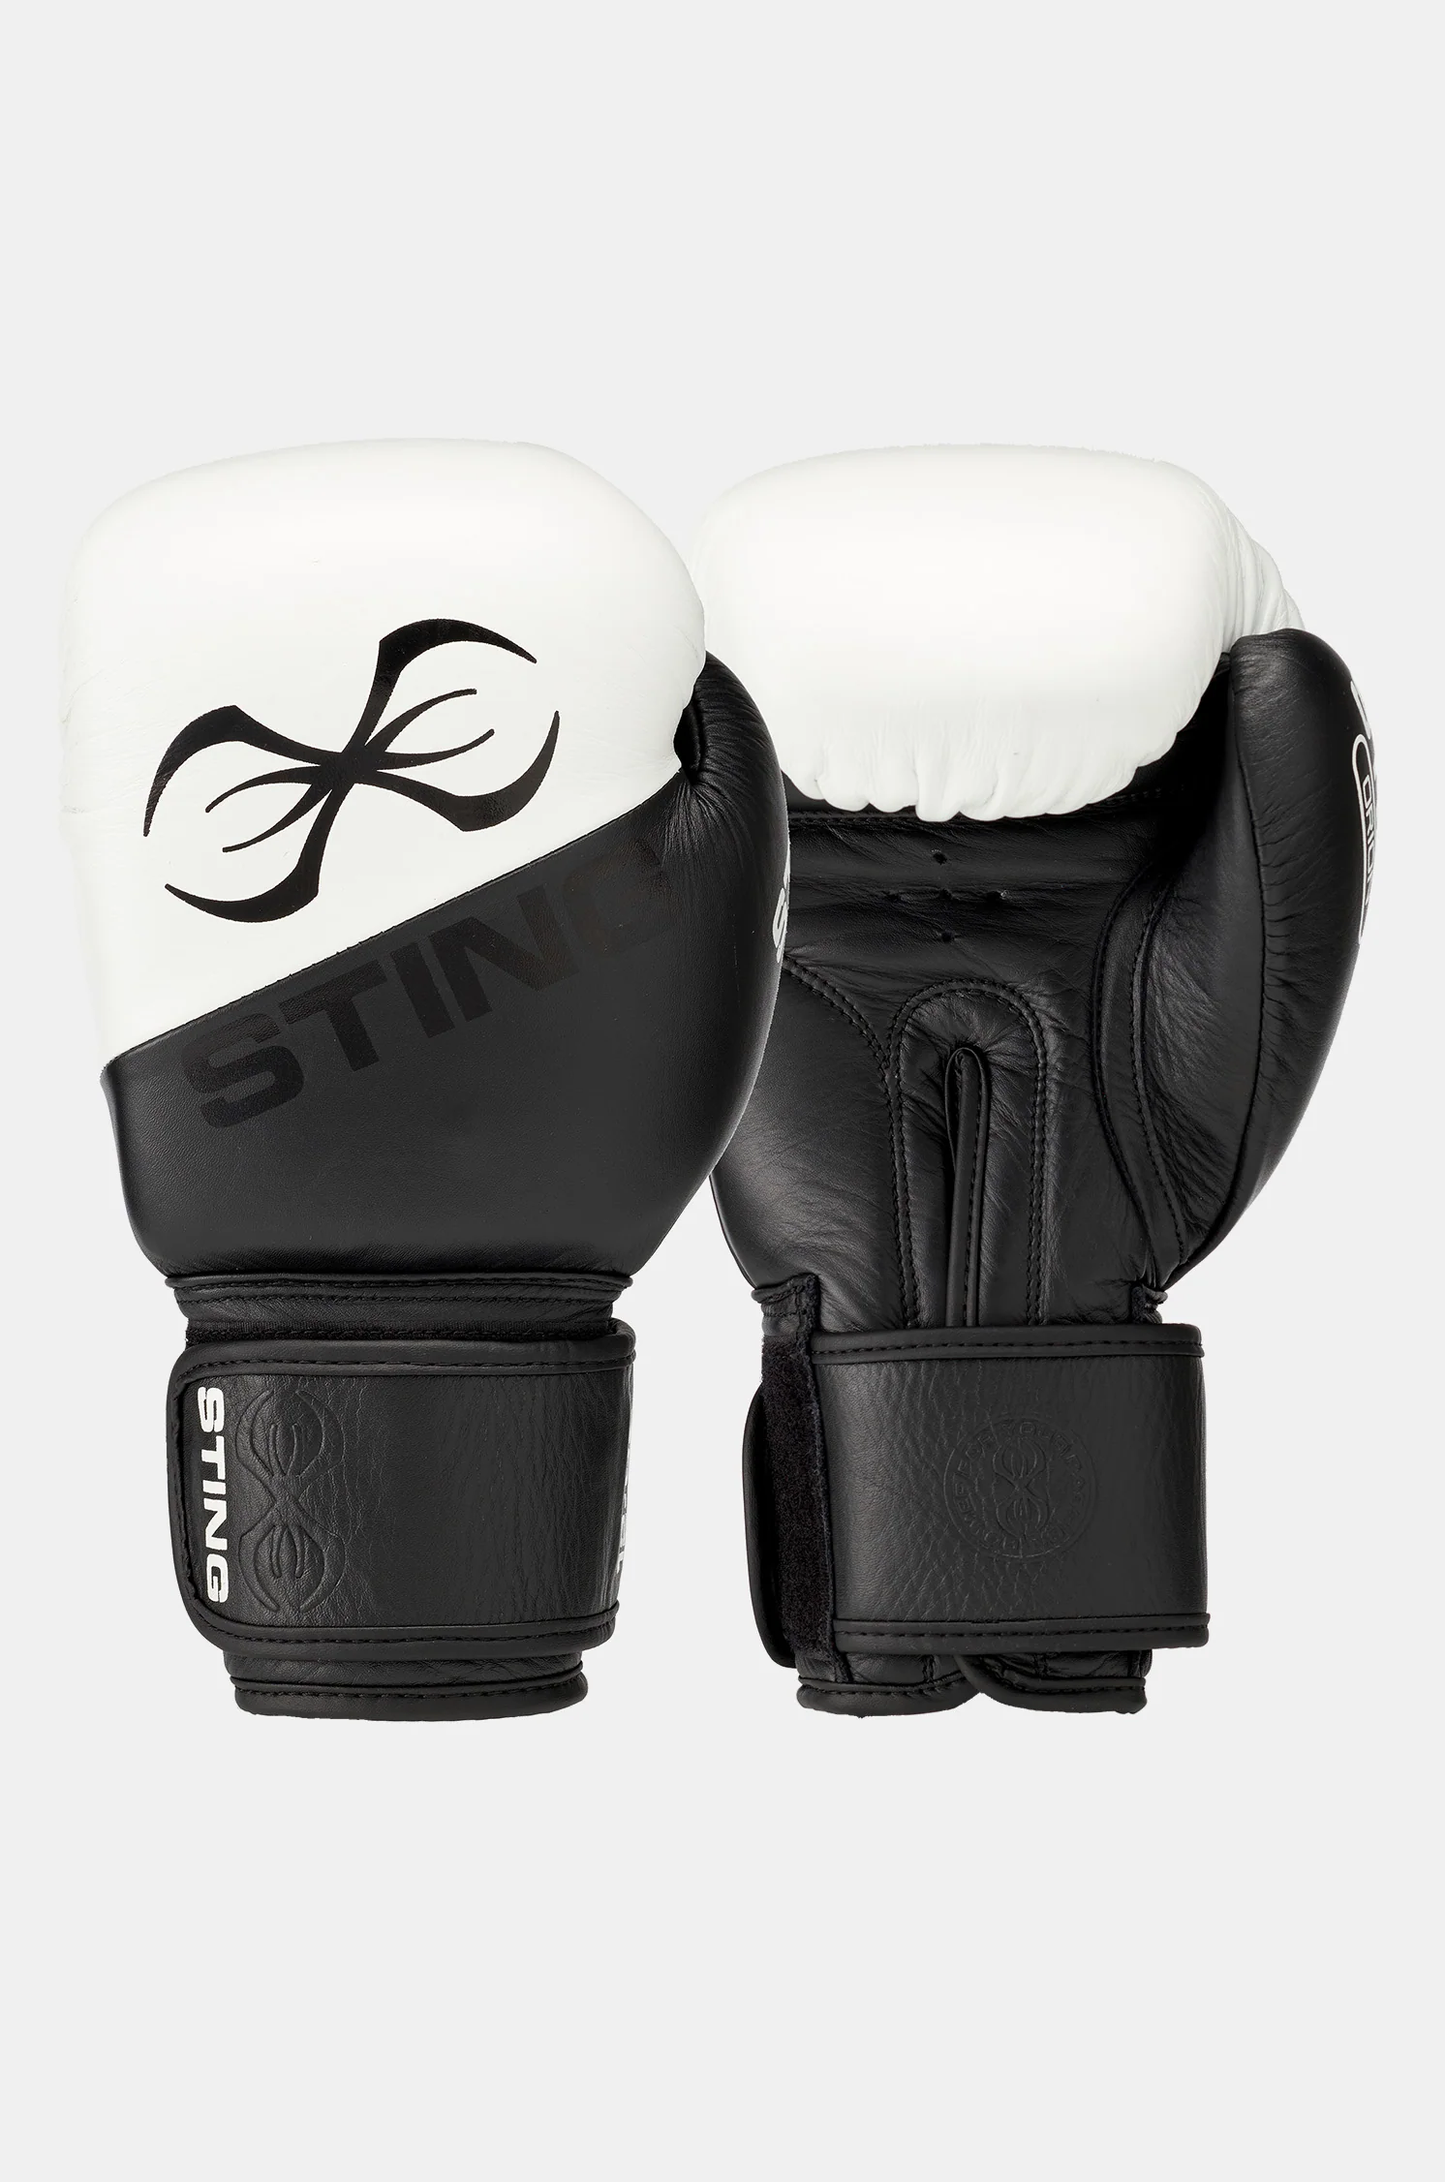 STING Orion Boxing gloves